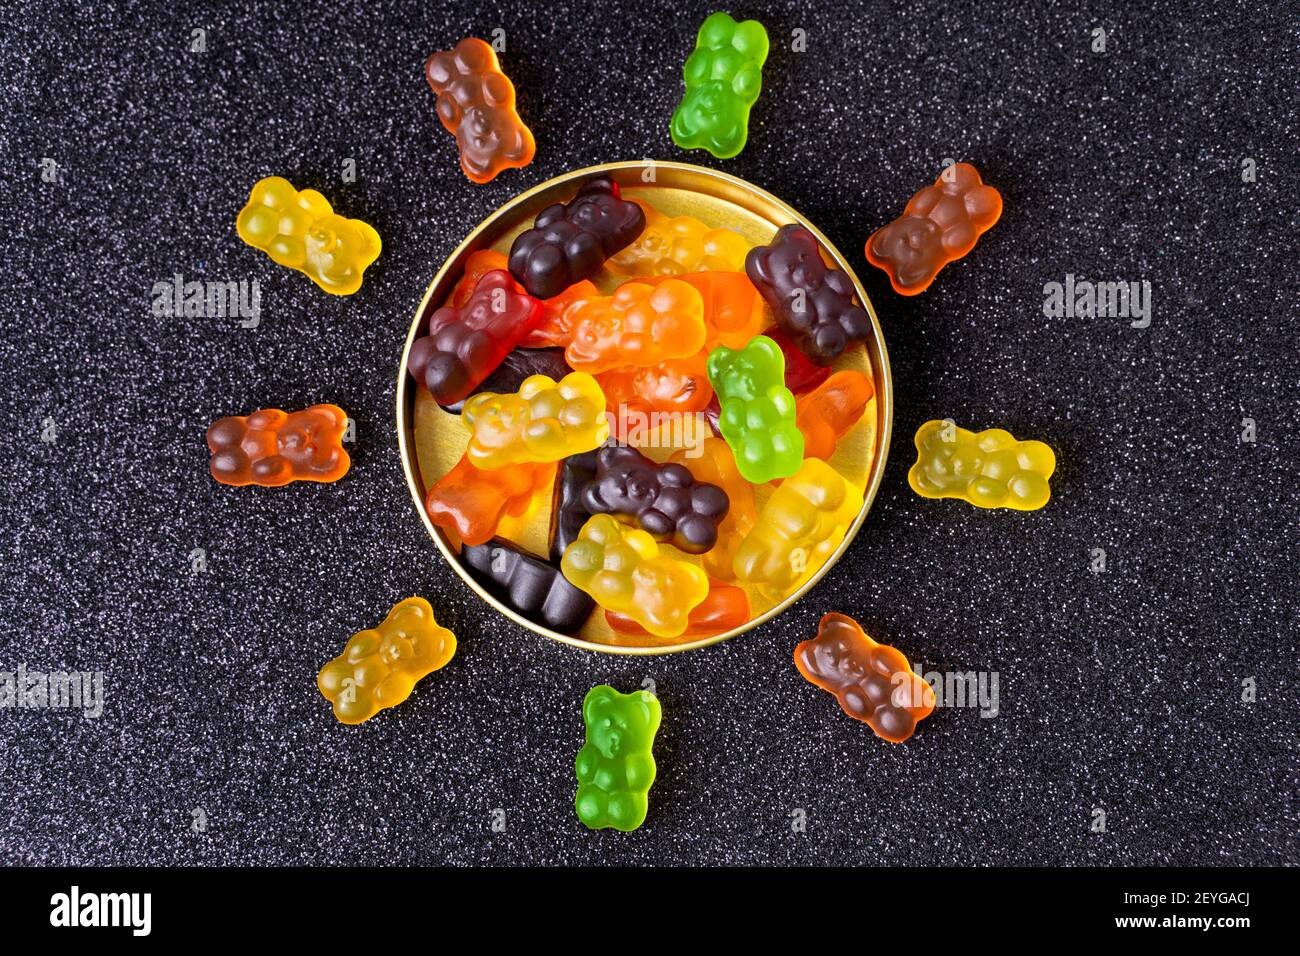 Gummy bears arranged in the shape of a sun around a candy box on a sugar coated background. Stock Photo